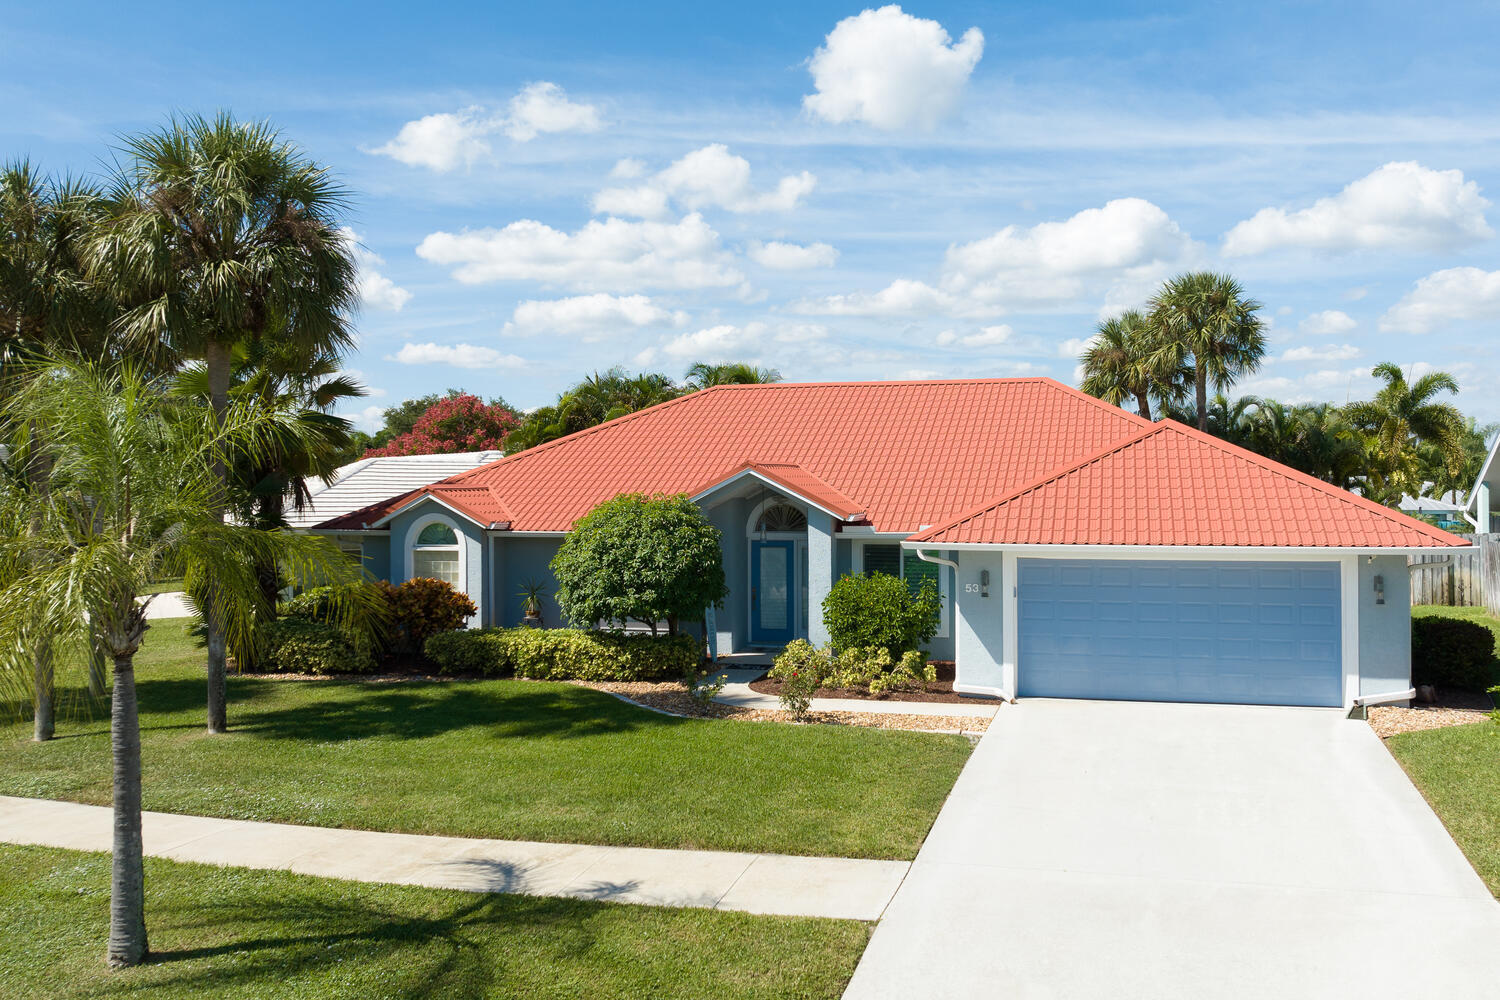 53 Birch Place, Tequesta, Palm Beach County, Florida - 3 Bedrooms  
2 Bathrooms - 